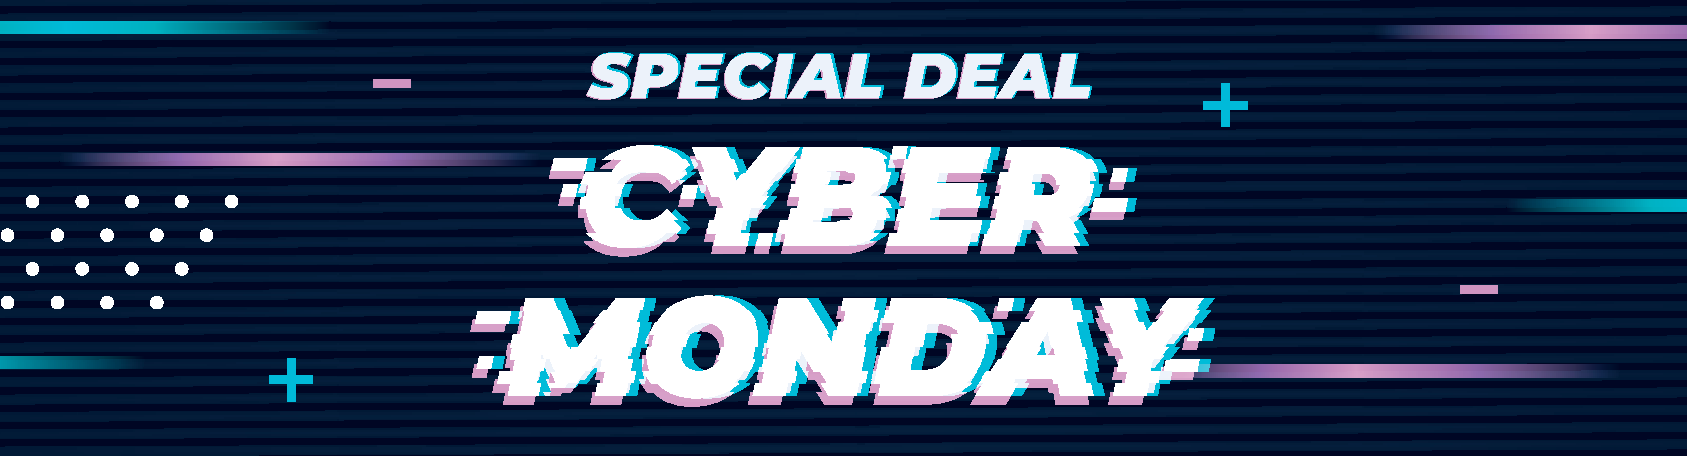 Cyber Monday Specials